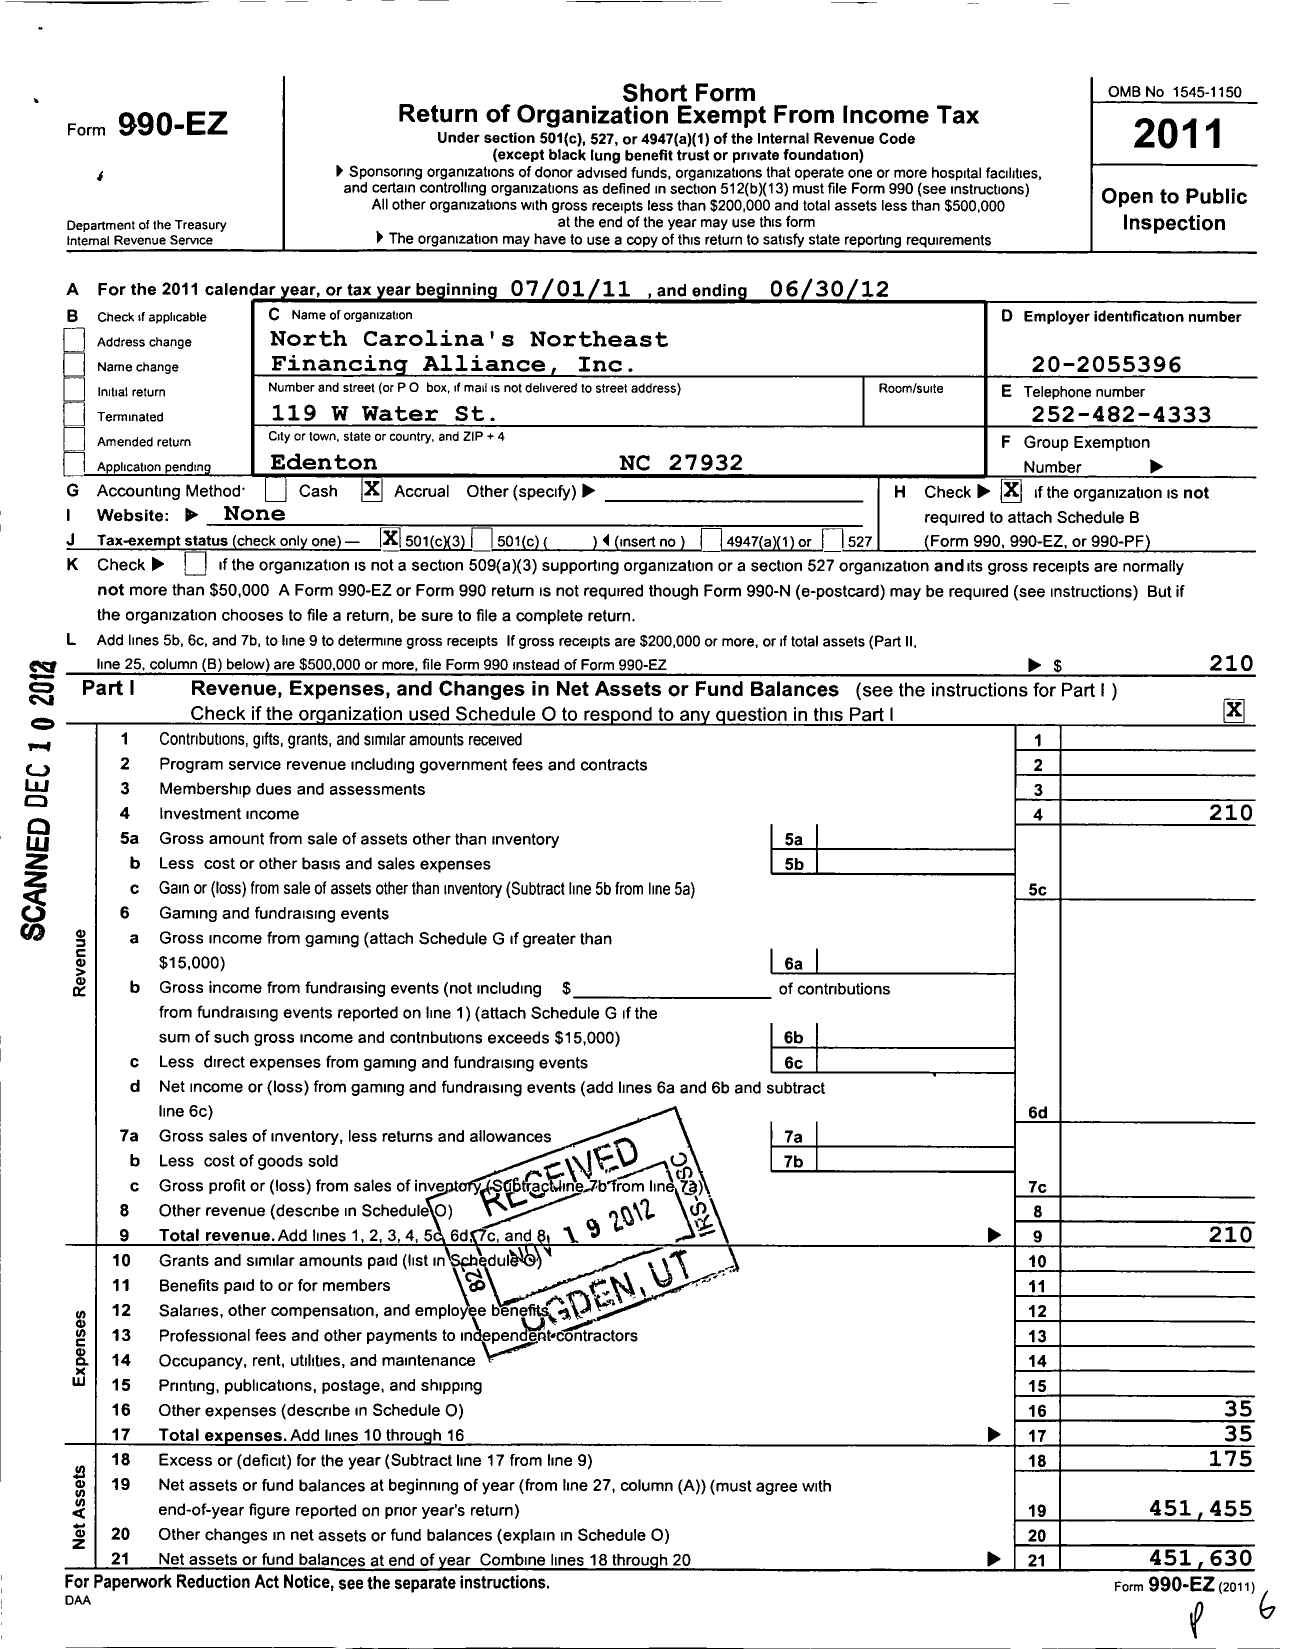 Image of first page of 2011 Form 990EZ for North Carolinas Northeast Financing Alliance